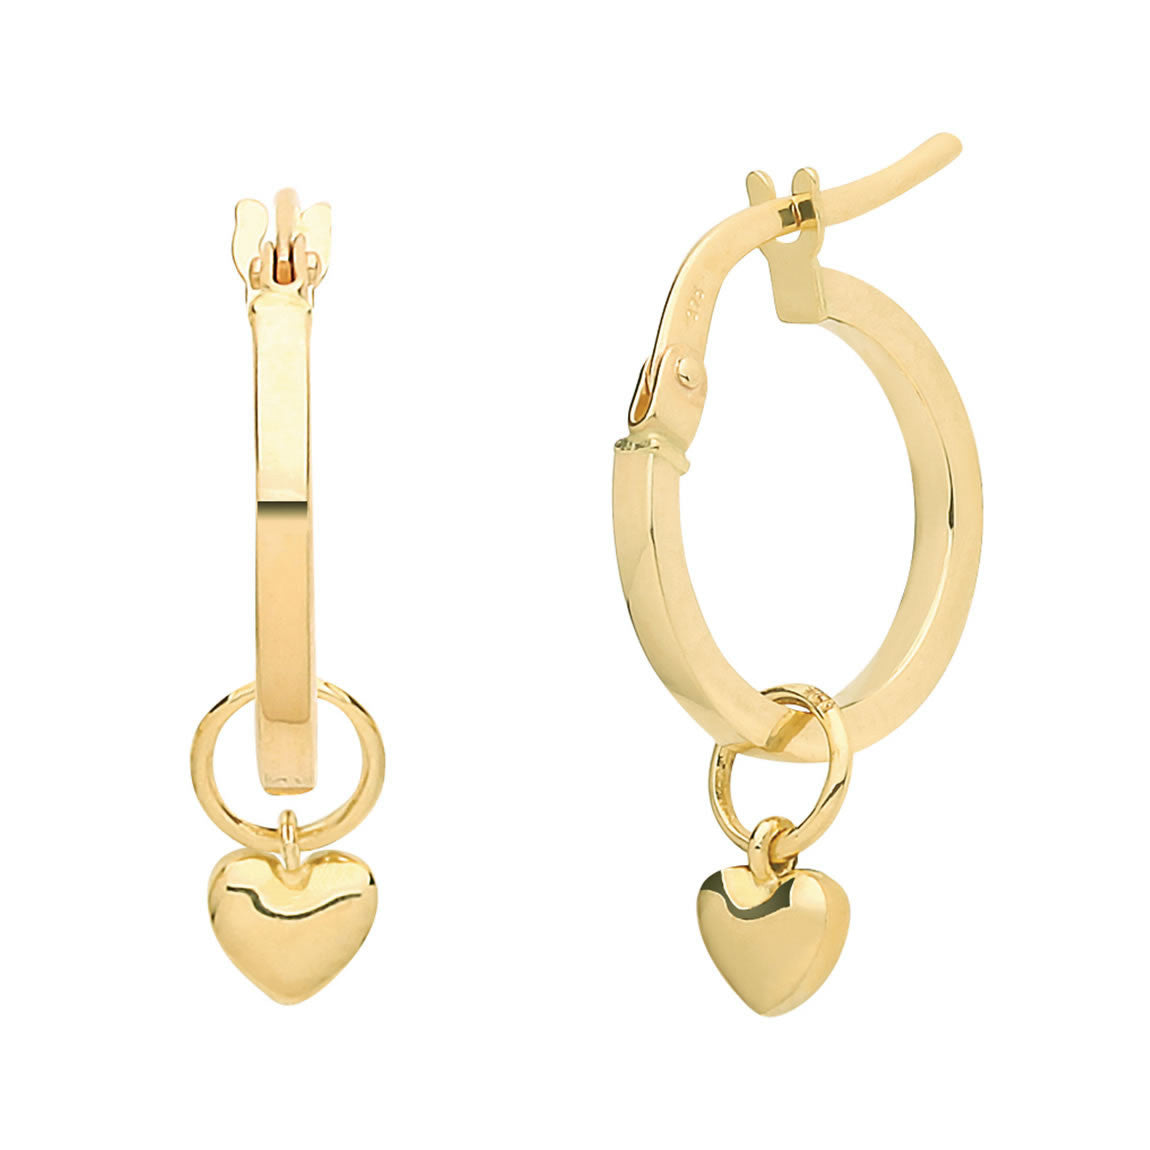 Earring with Delicate Heart Shaped Charm – NUE Hoops